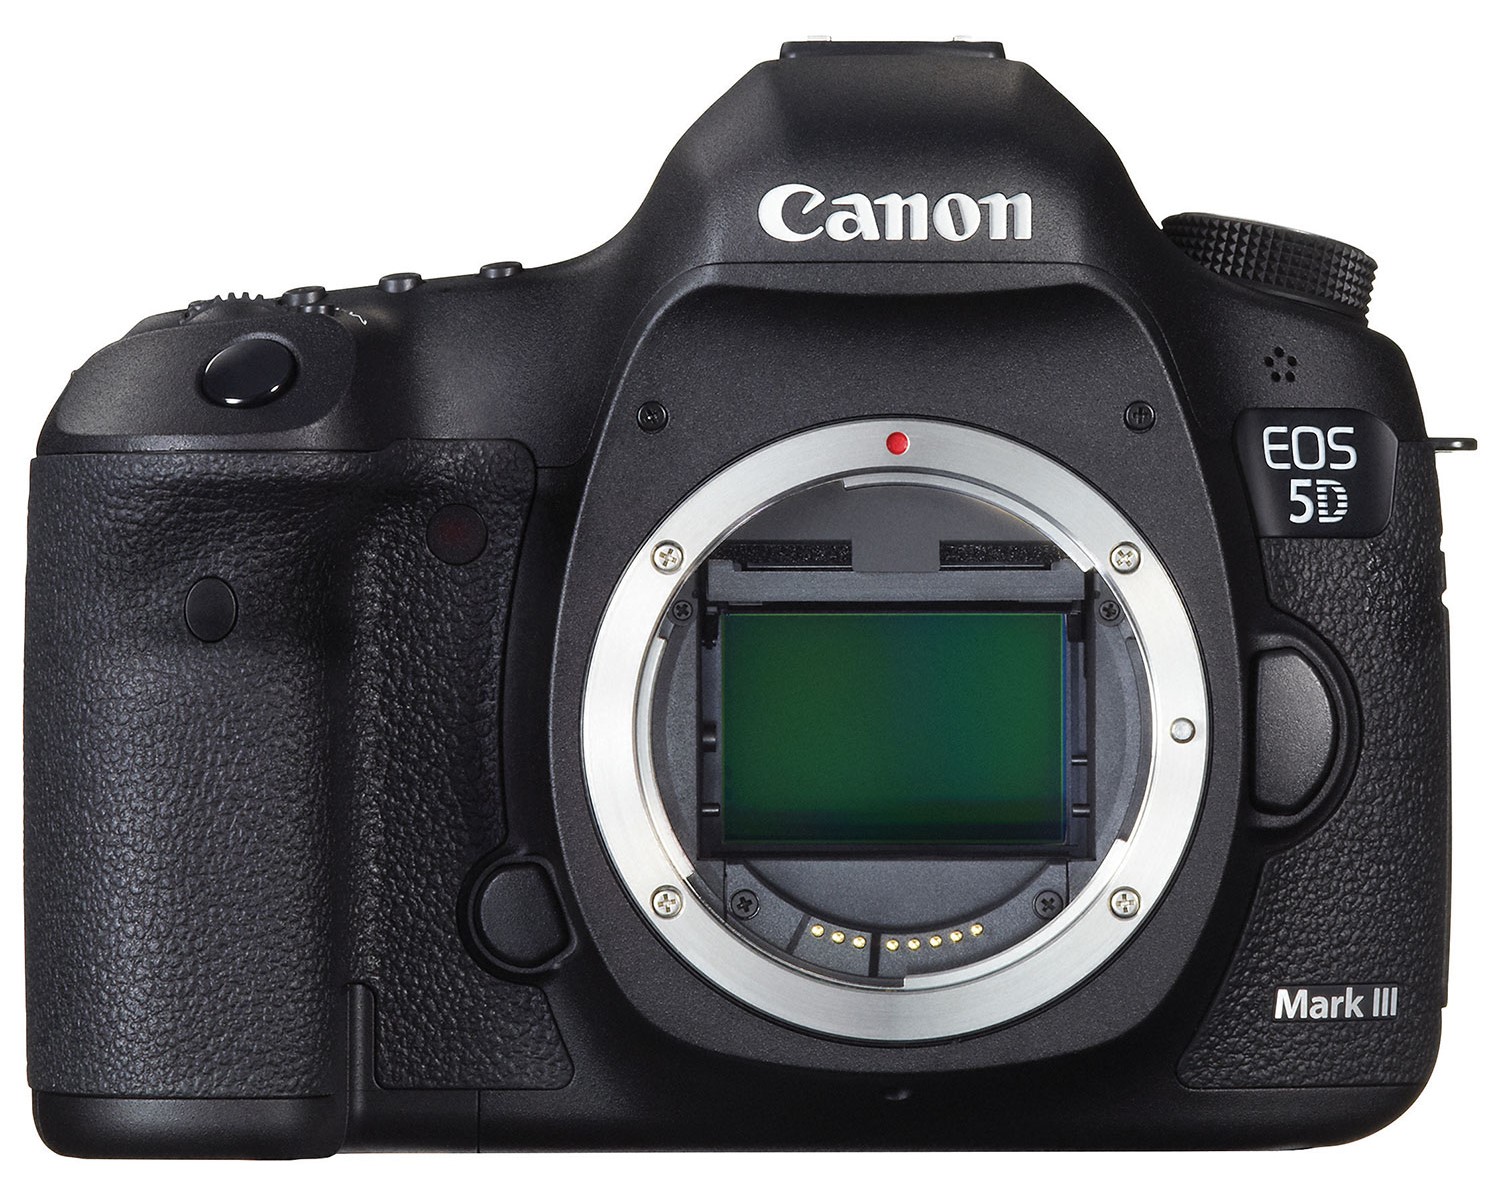 Best Camera for Portrait Photography: Canon EOS 5D Mark III